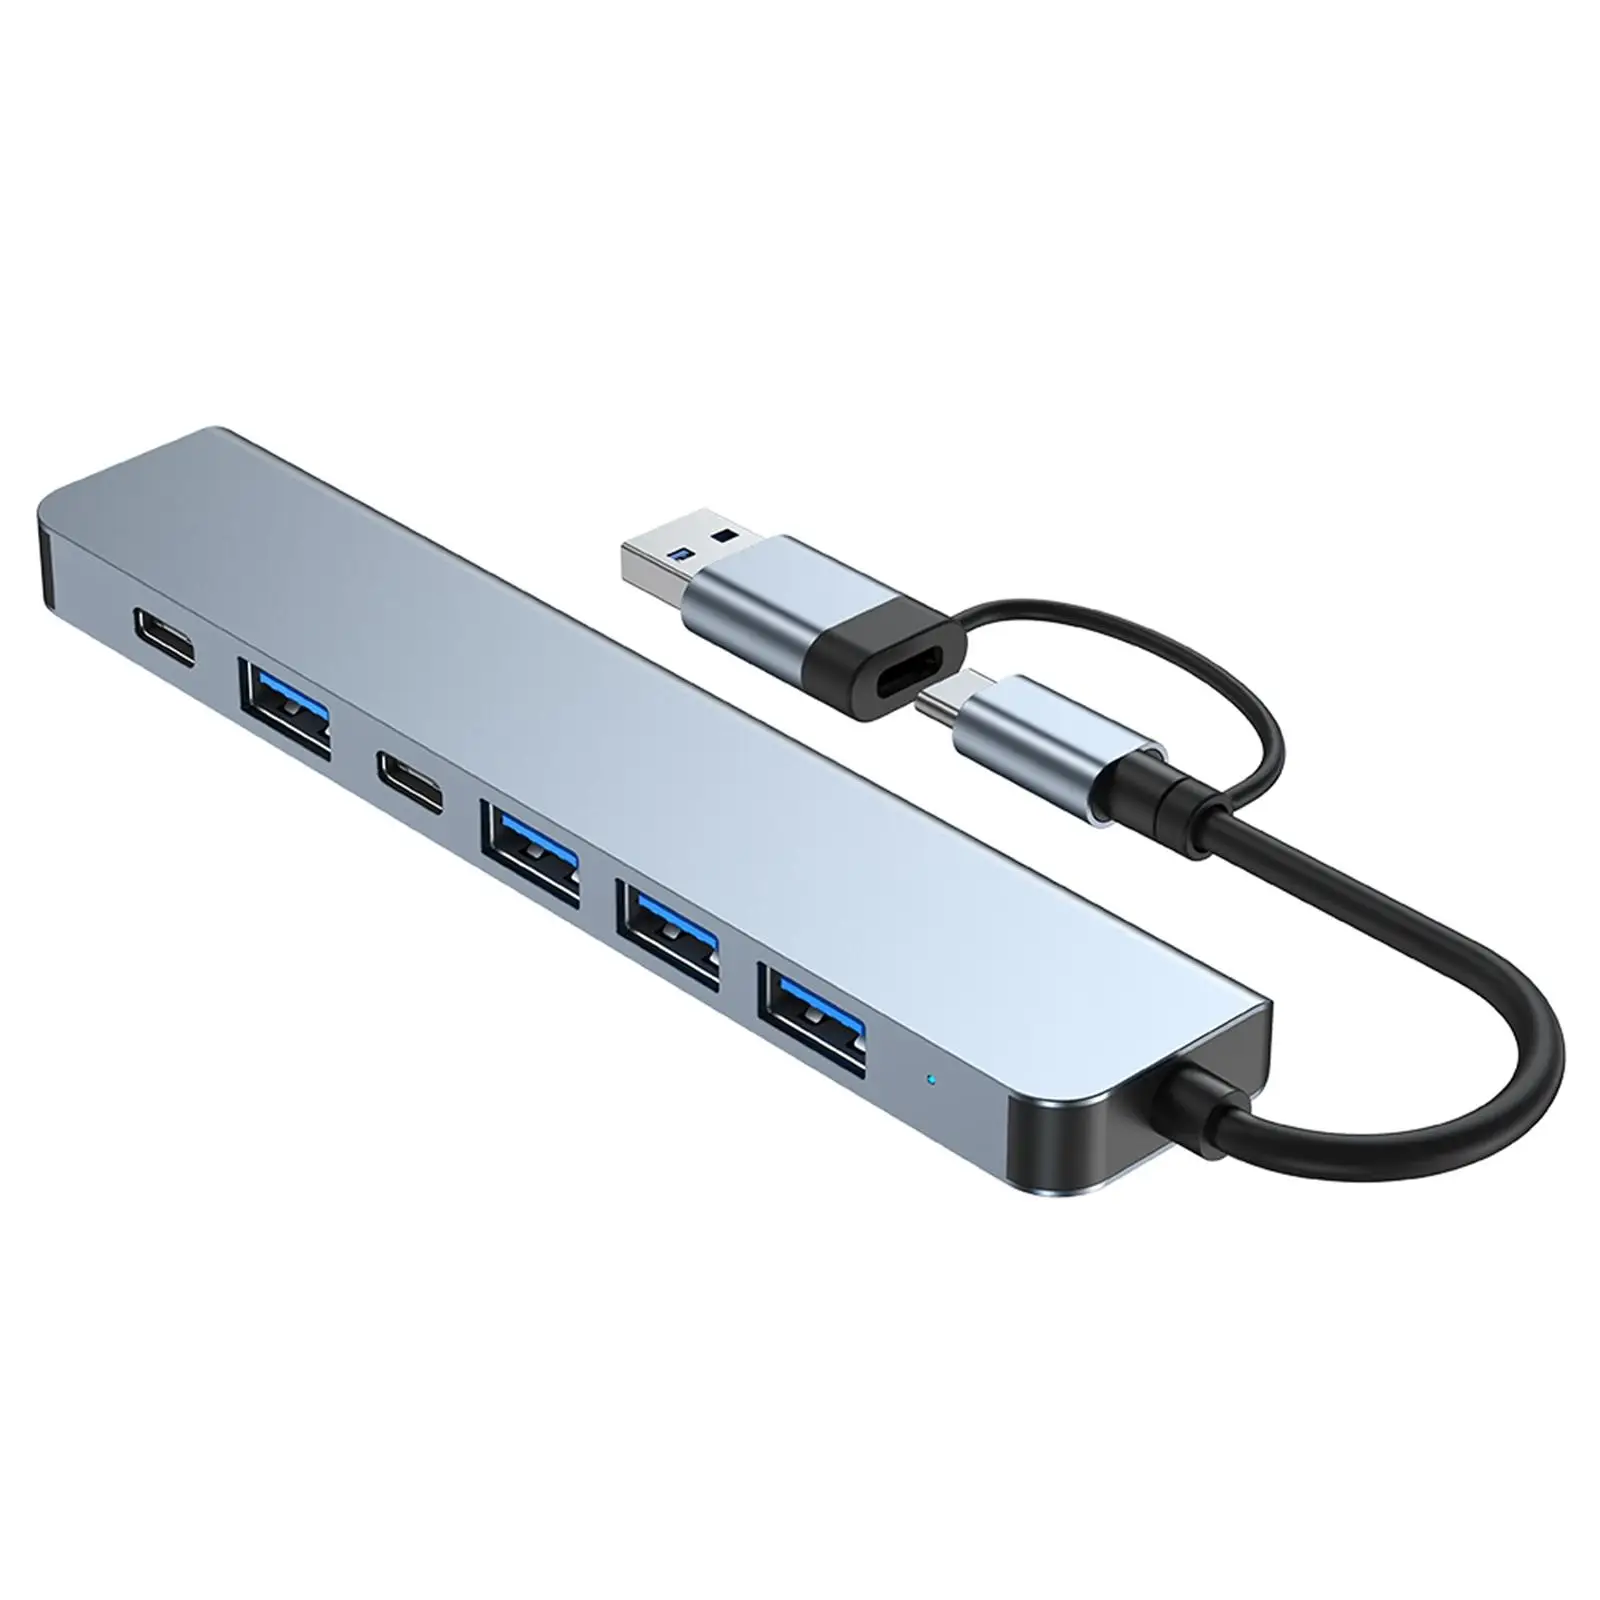 Portable USB Type C Hub Aluminum Alloy with A 5W Charging Port Docking Station Multiport Adapter Converter for Keyboard Laptop